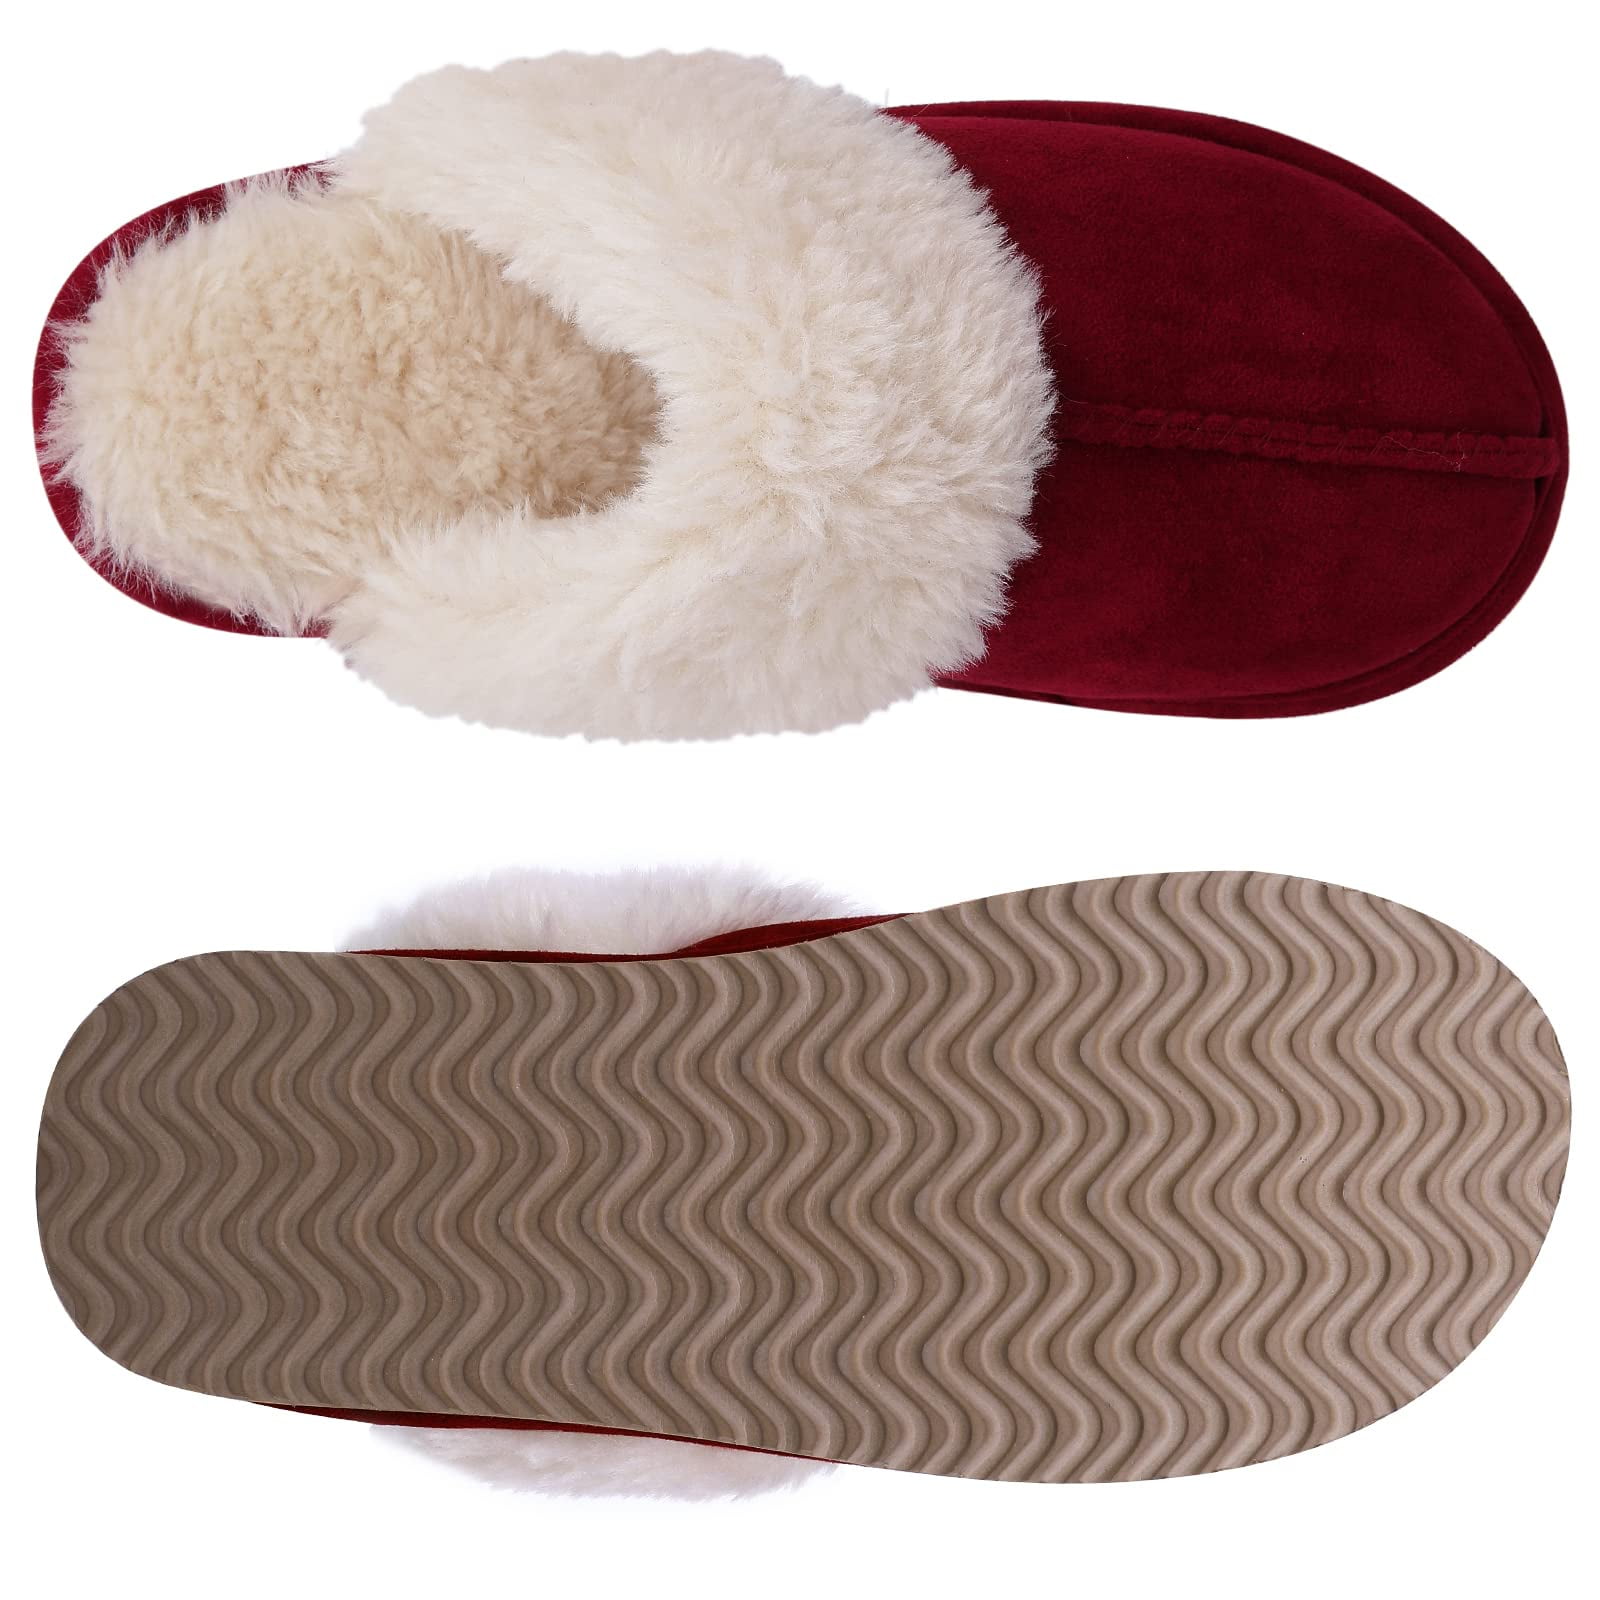 Comfort Fuzzy Plush Lining Slip On House Shoes,Winter Slippers Indoor Fur  Warm Shoes, Couple Wool Slipper Home Floor Shoe Brown US 8.5-9.5